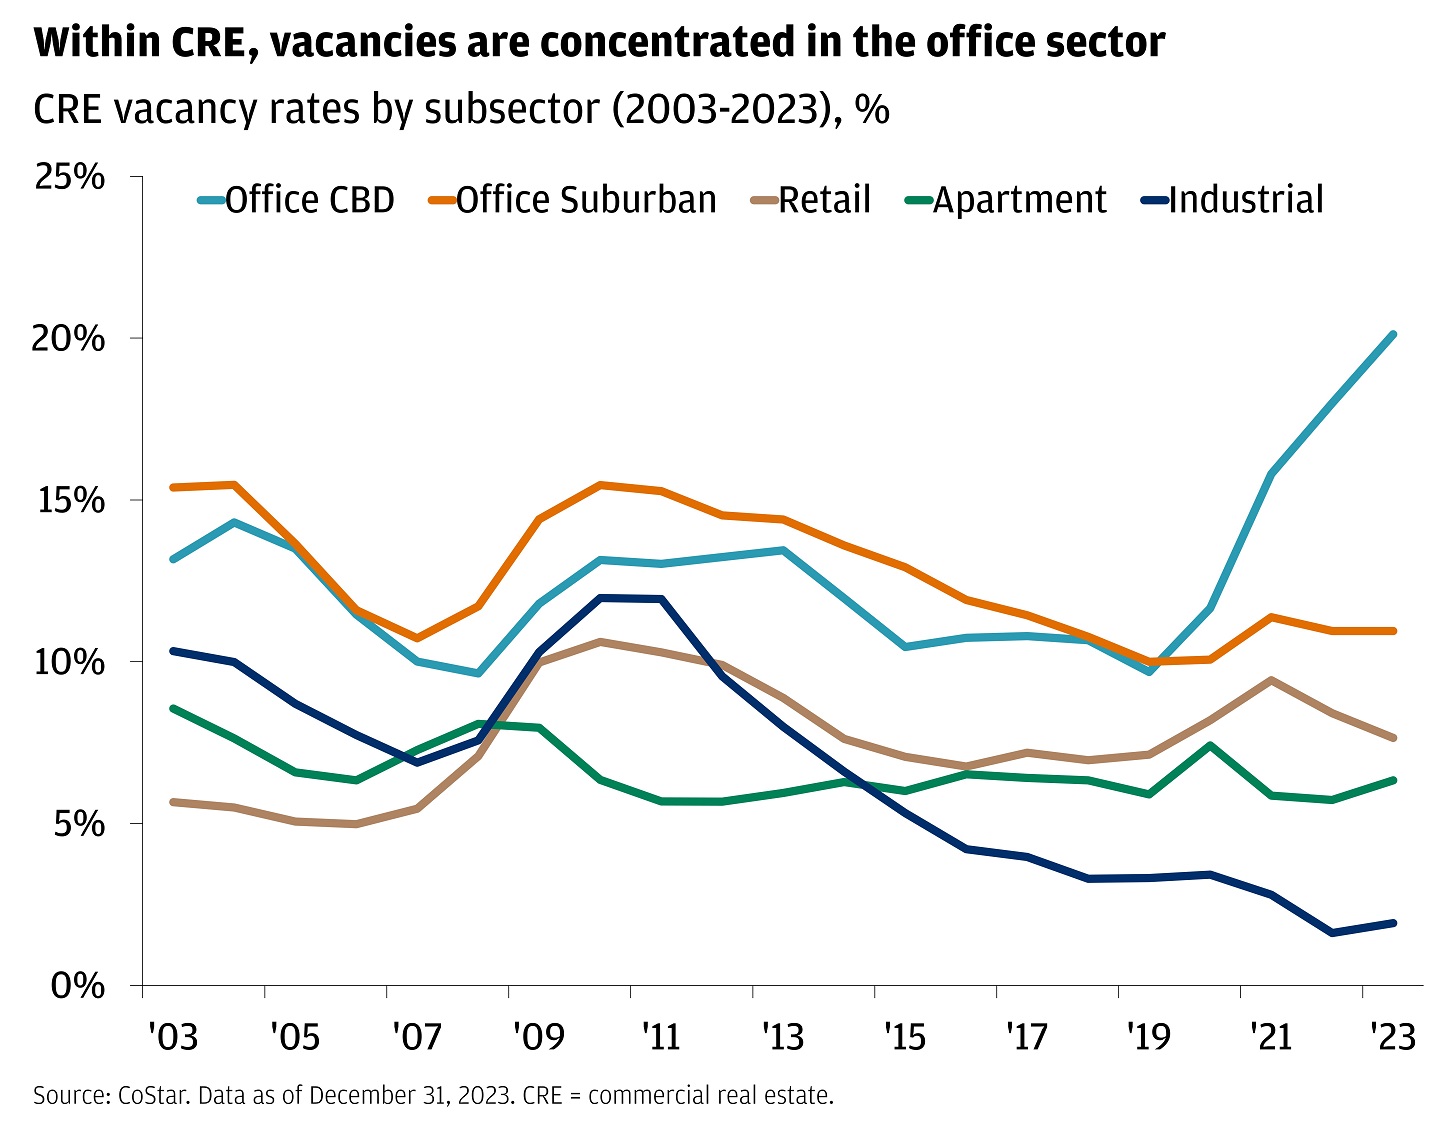 This line graph shows the CRE vacancy rates by subsector from 2003-2023.